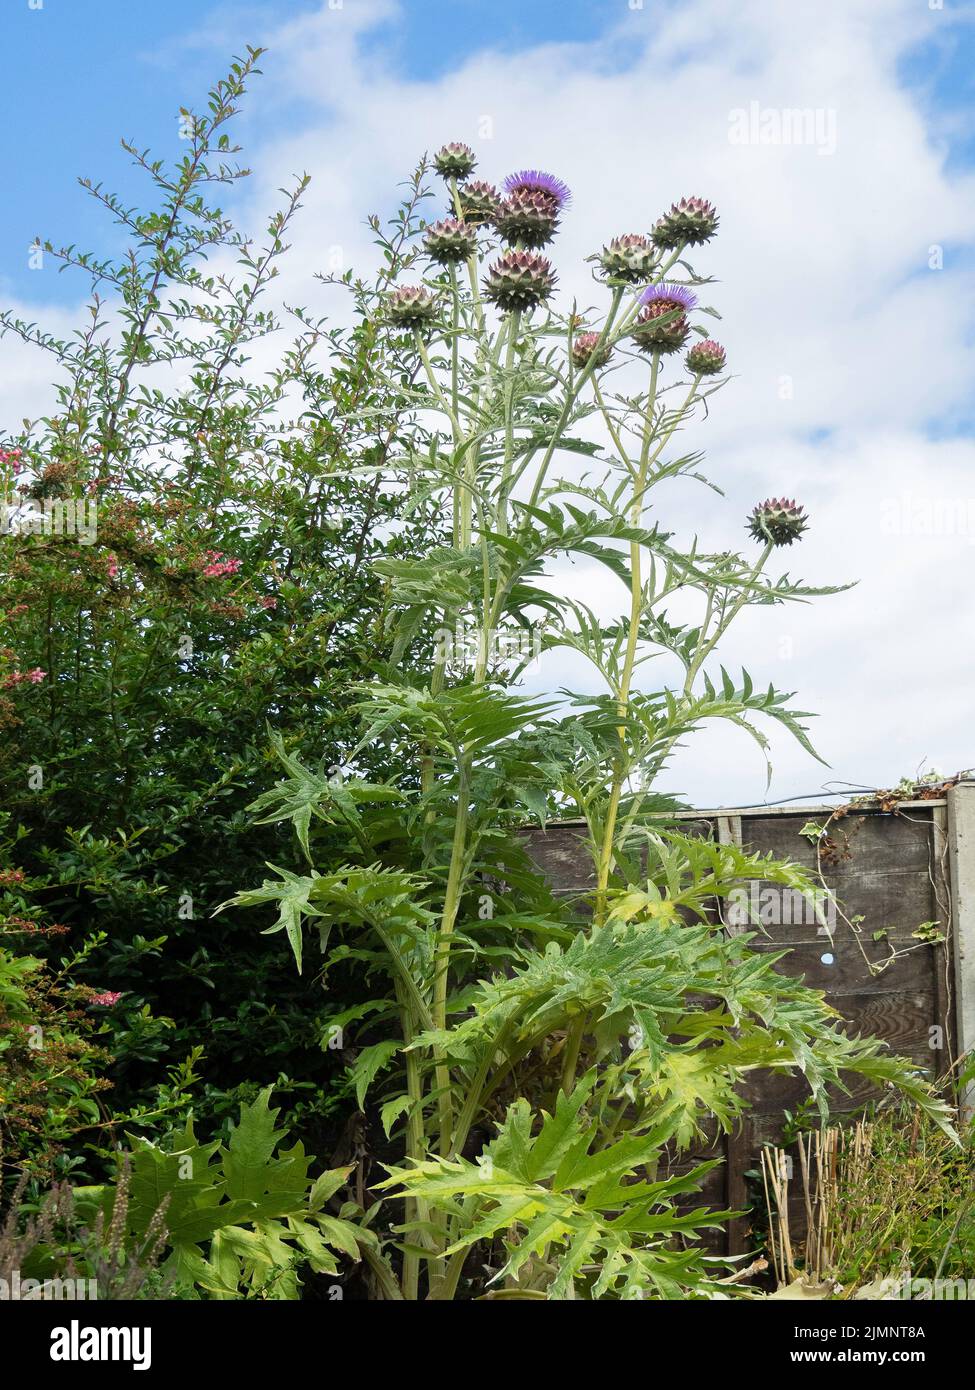 A Cardoon Cynara cardunculus also called the artichoke thistle cultivated in North Yorkshire England UK Stock Photo